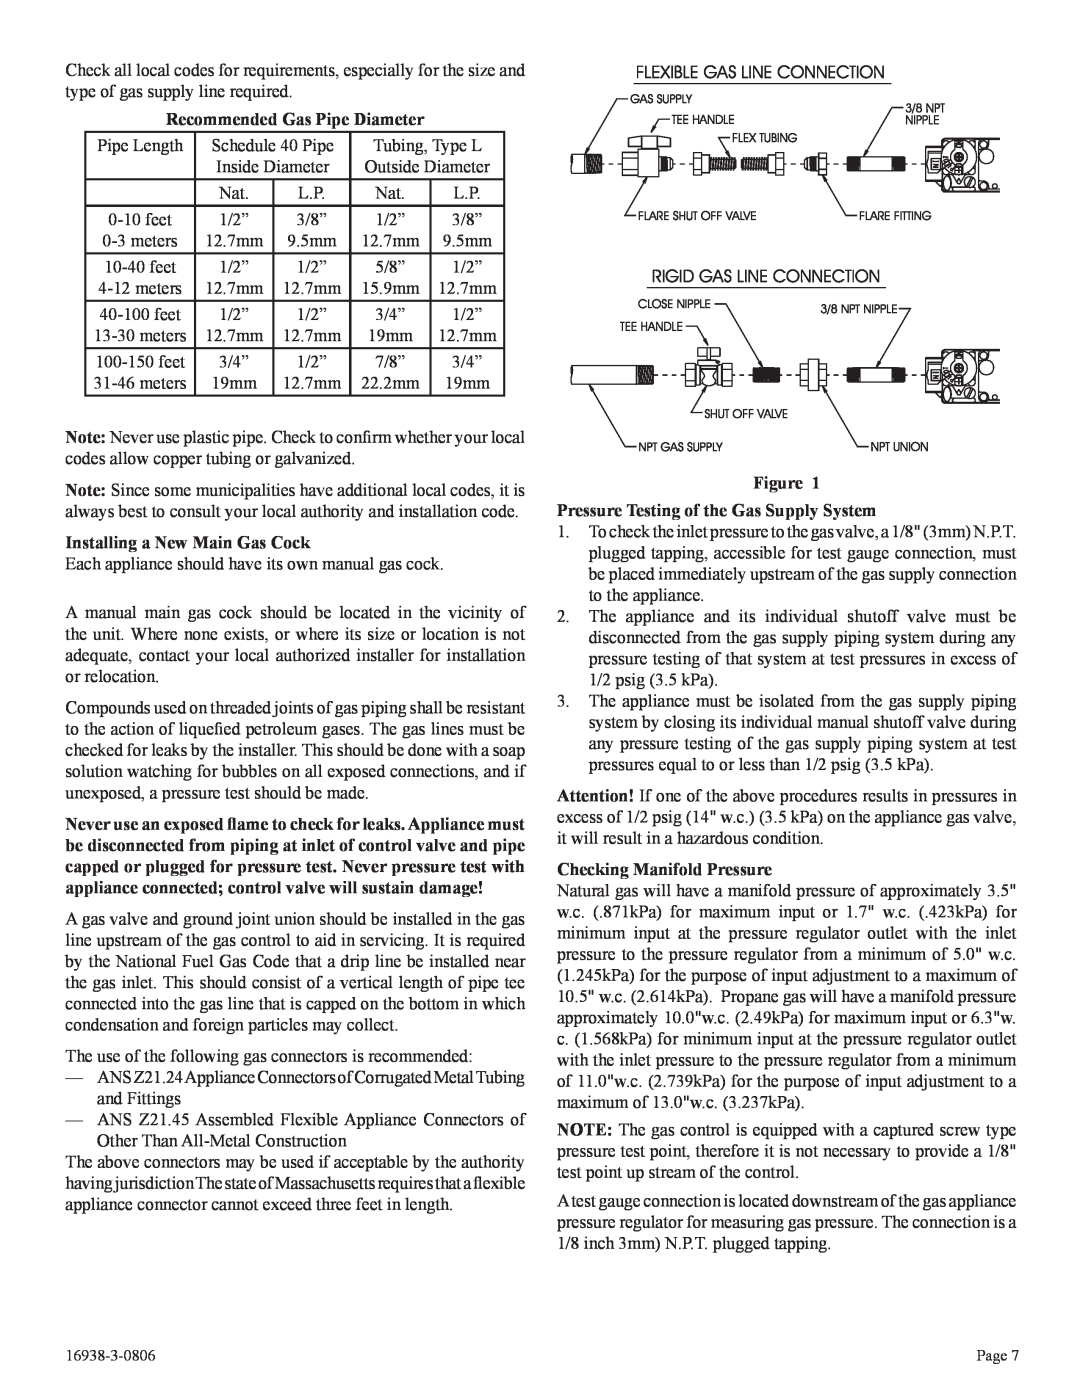 Empire Comfort Systems CIVF-25-21 installation instructions Recommended Gas Pipe Diameter, Installing a New Main Gas Cock 